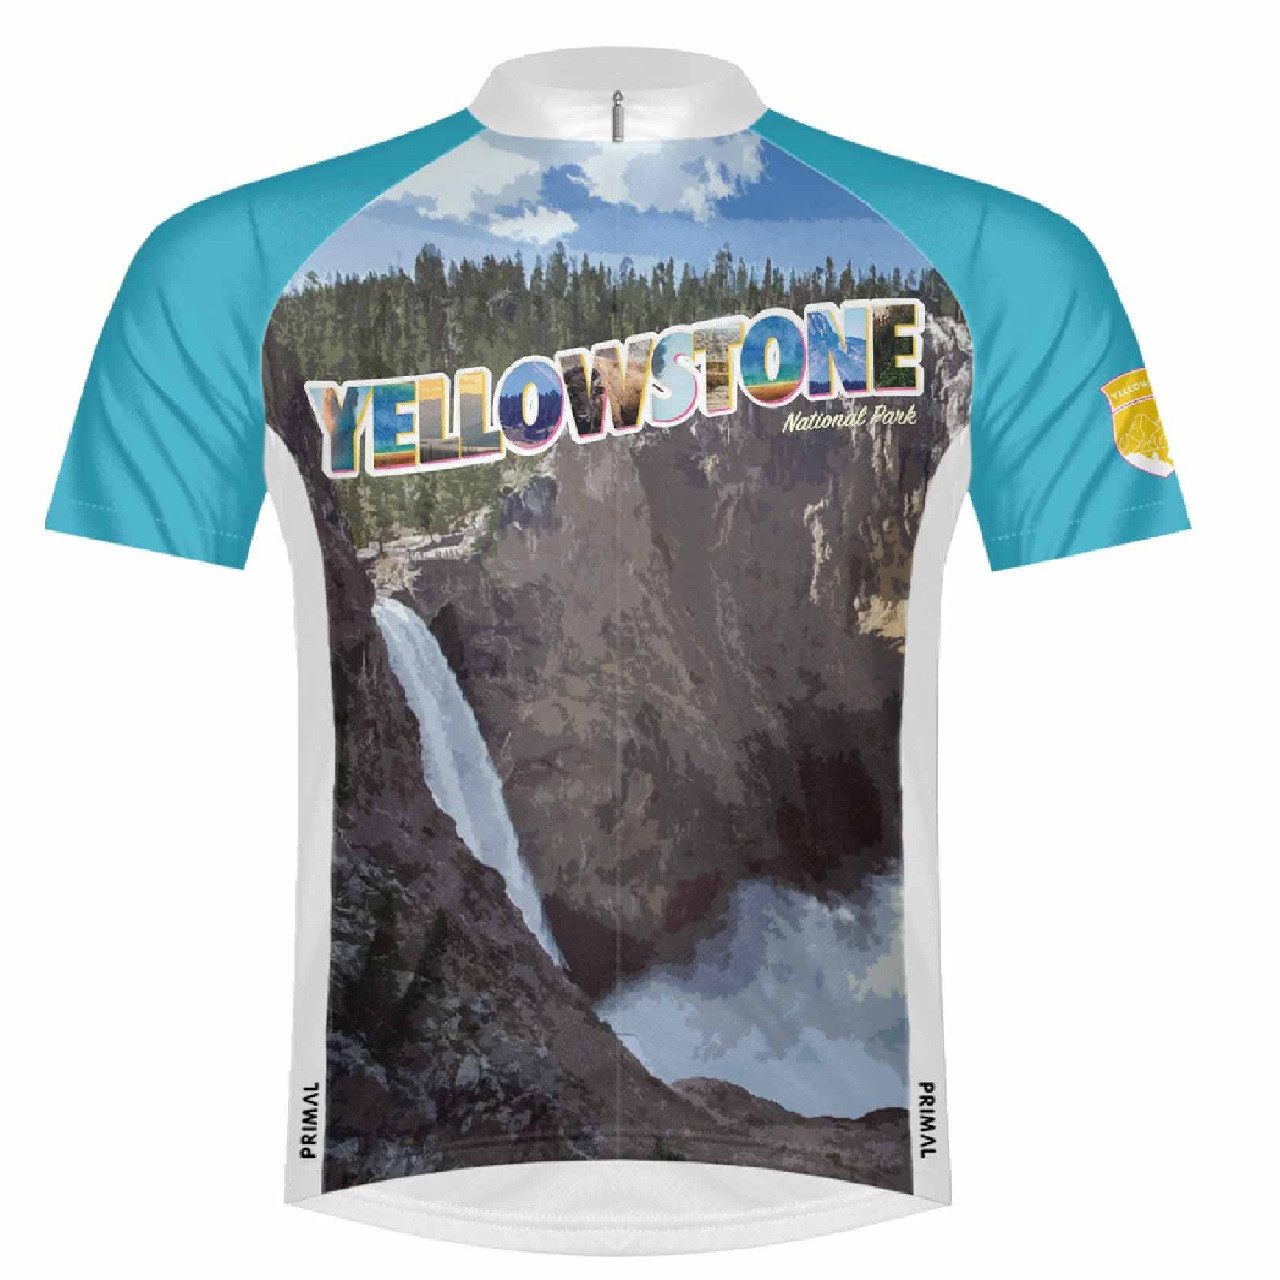 Primal Wear Yellowstone National Park cycling Jersey $75